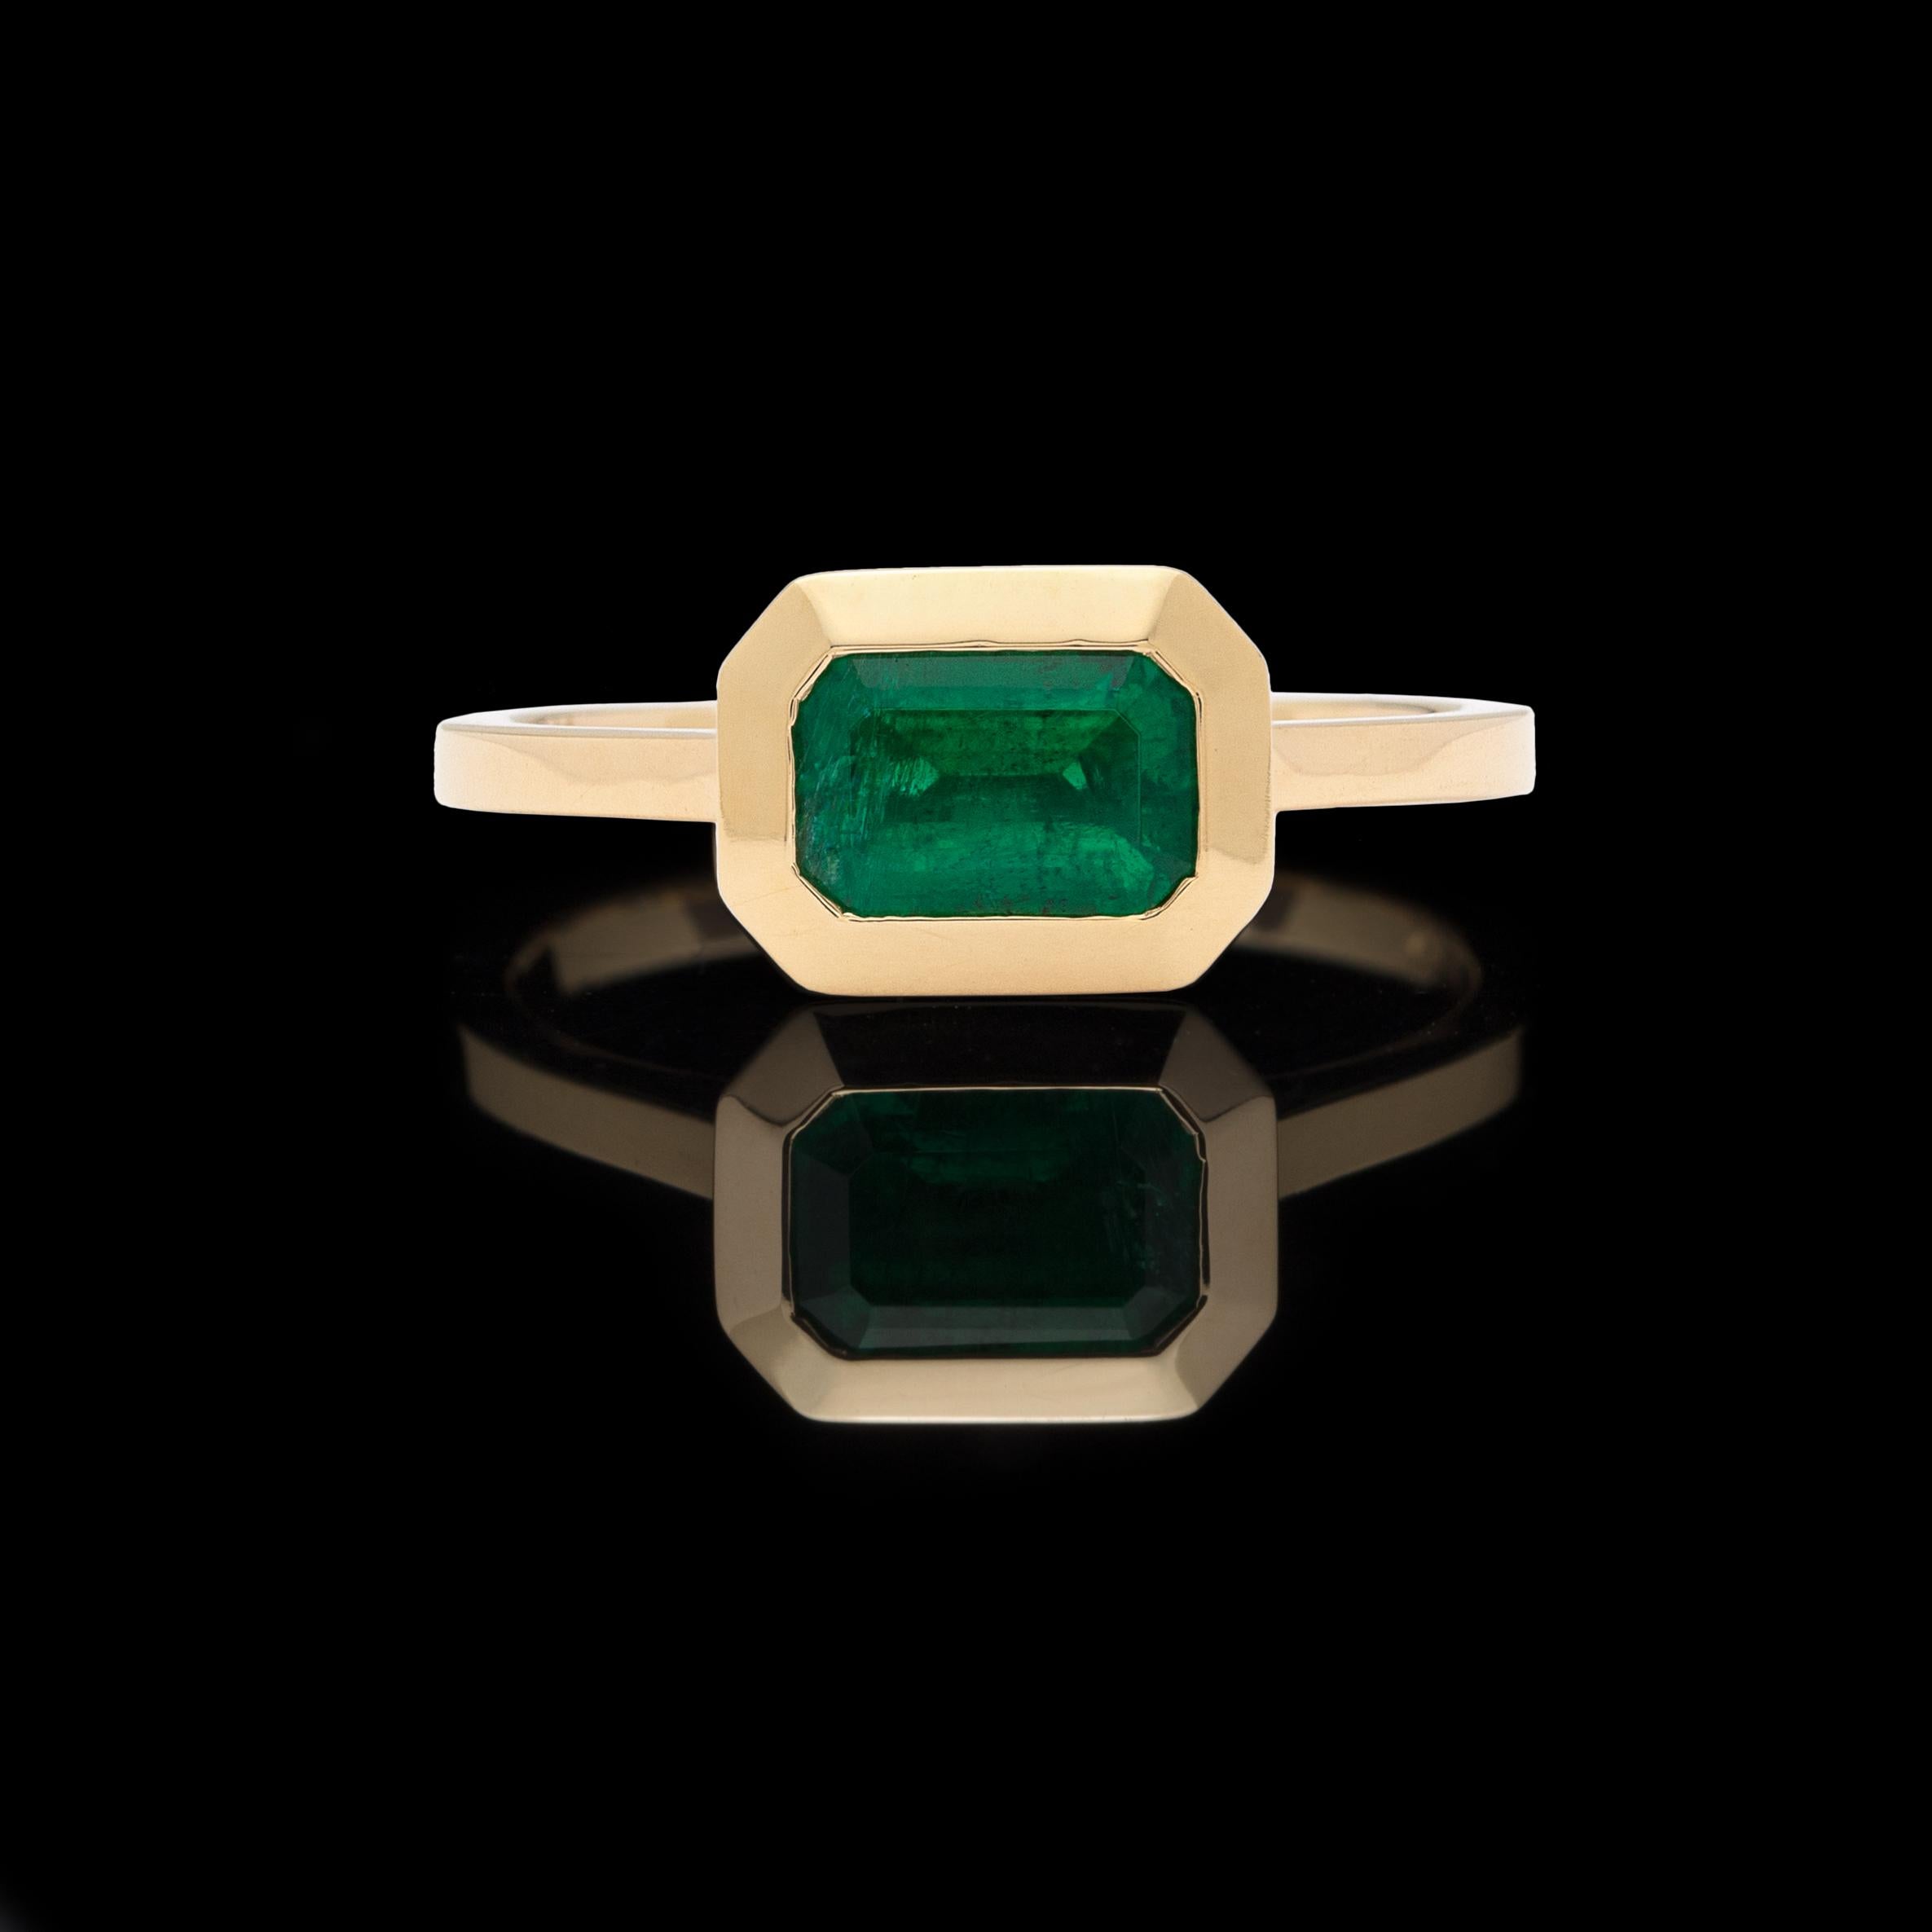 Elegant and charming, this 18k yellow gold ring features a vibrant green rectangular-cut emerald weighing 0.87-ct., horizontally bezel-set in a contemporary custom design. The ring weighs 3.3 grams and currently fits a 5 3/4 finger size, with easy